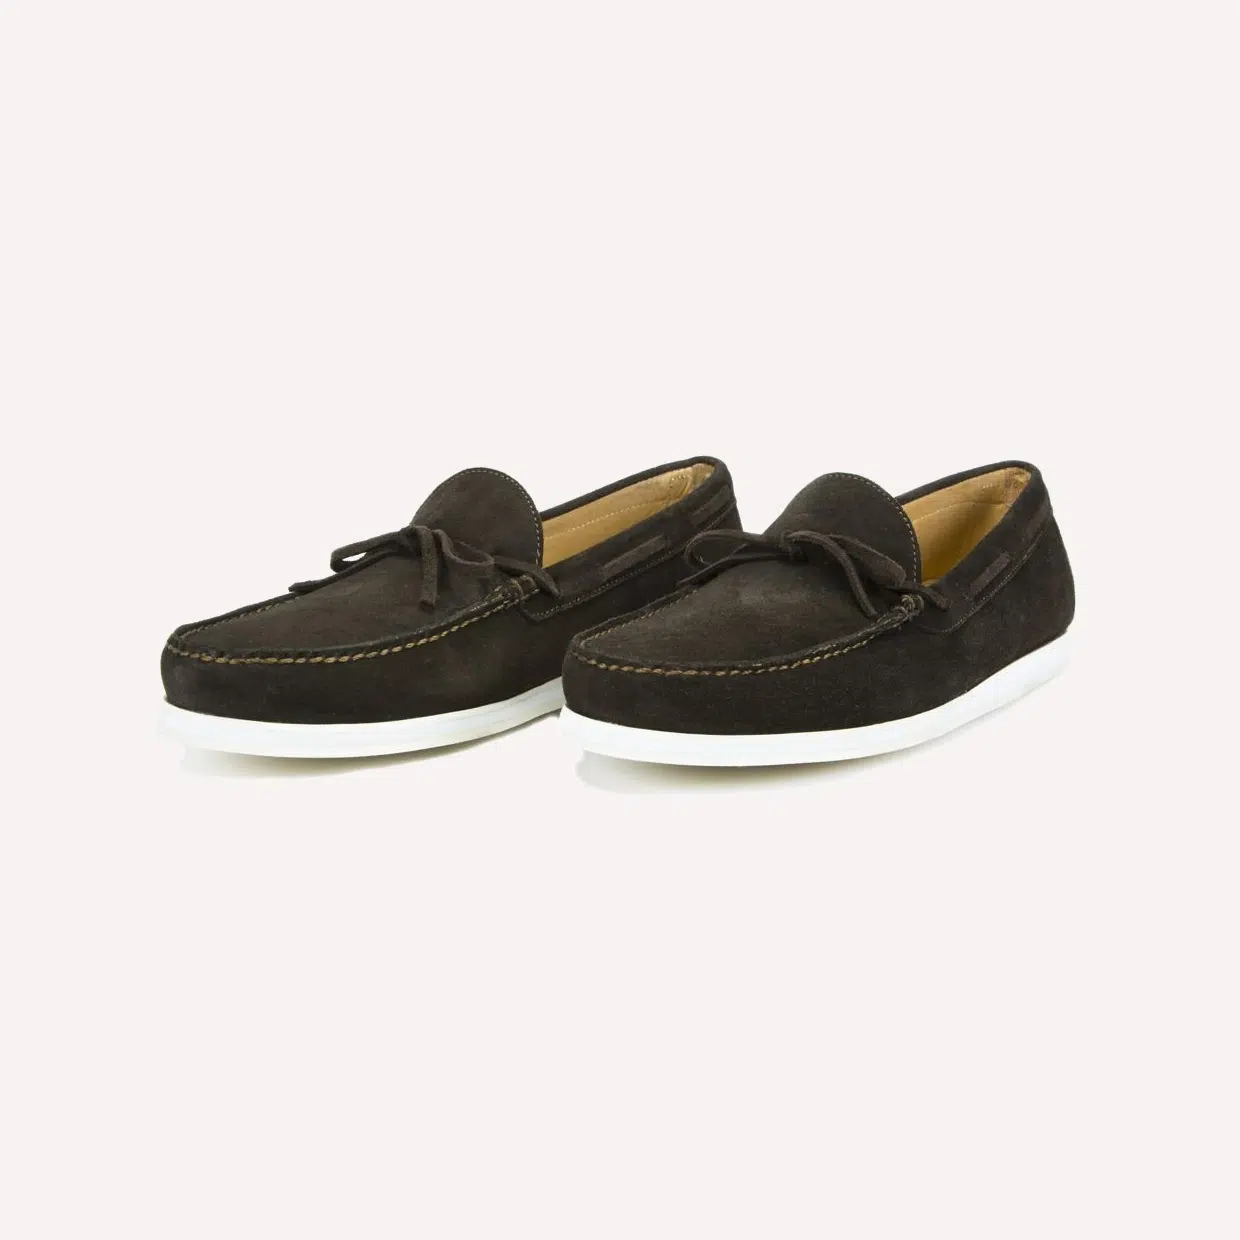 Jay Butler Naples Driving Loafers